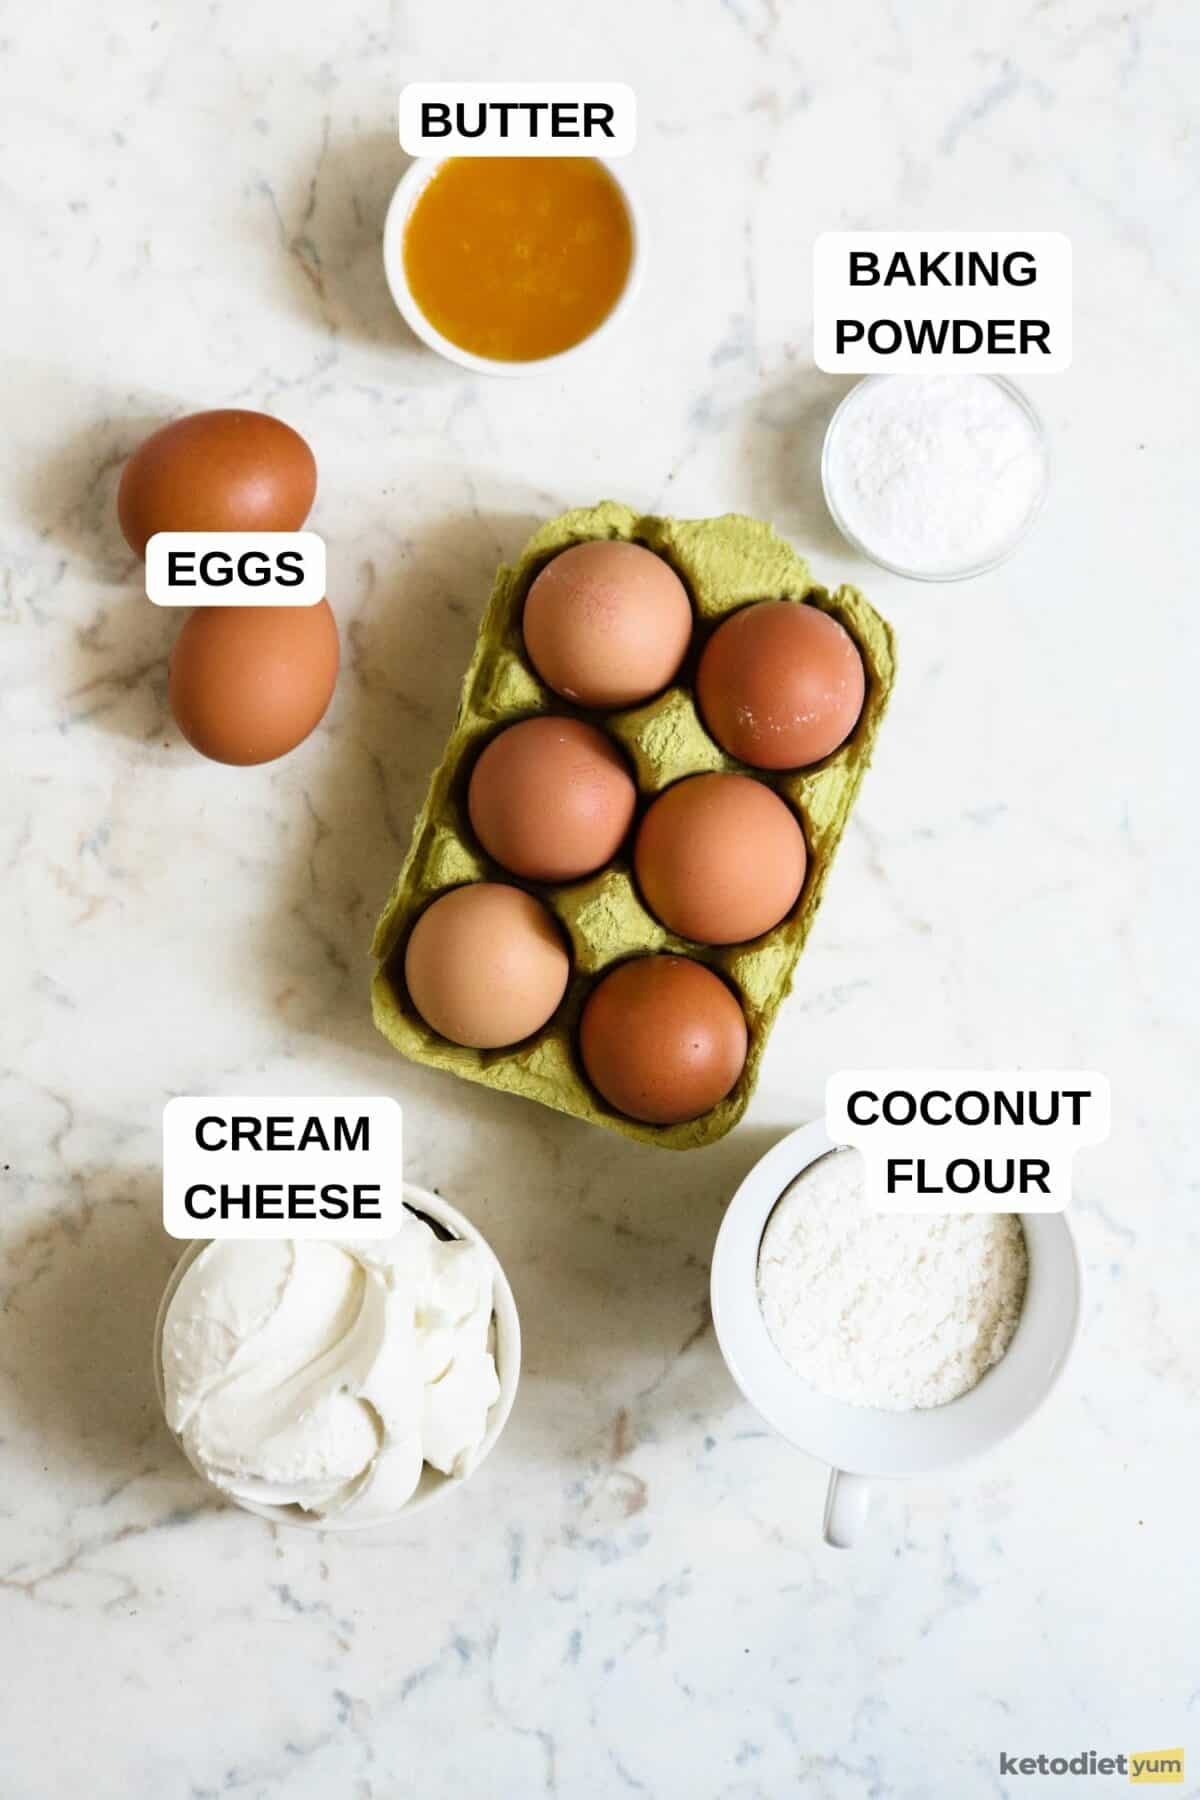 Eggs in a carton and small bowls filled with various ingredients on a table